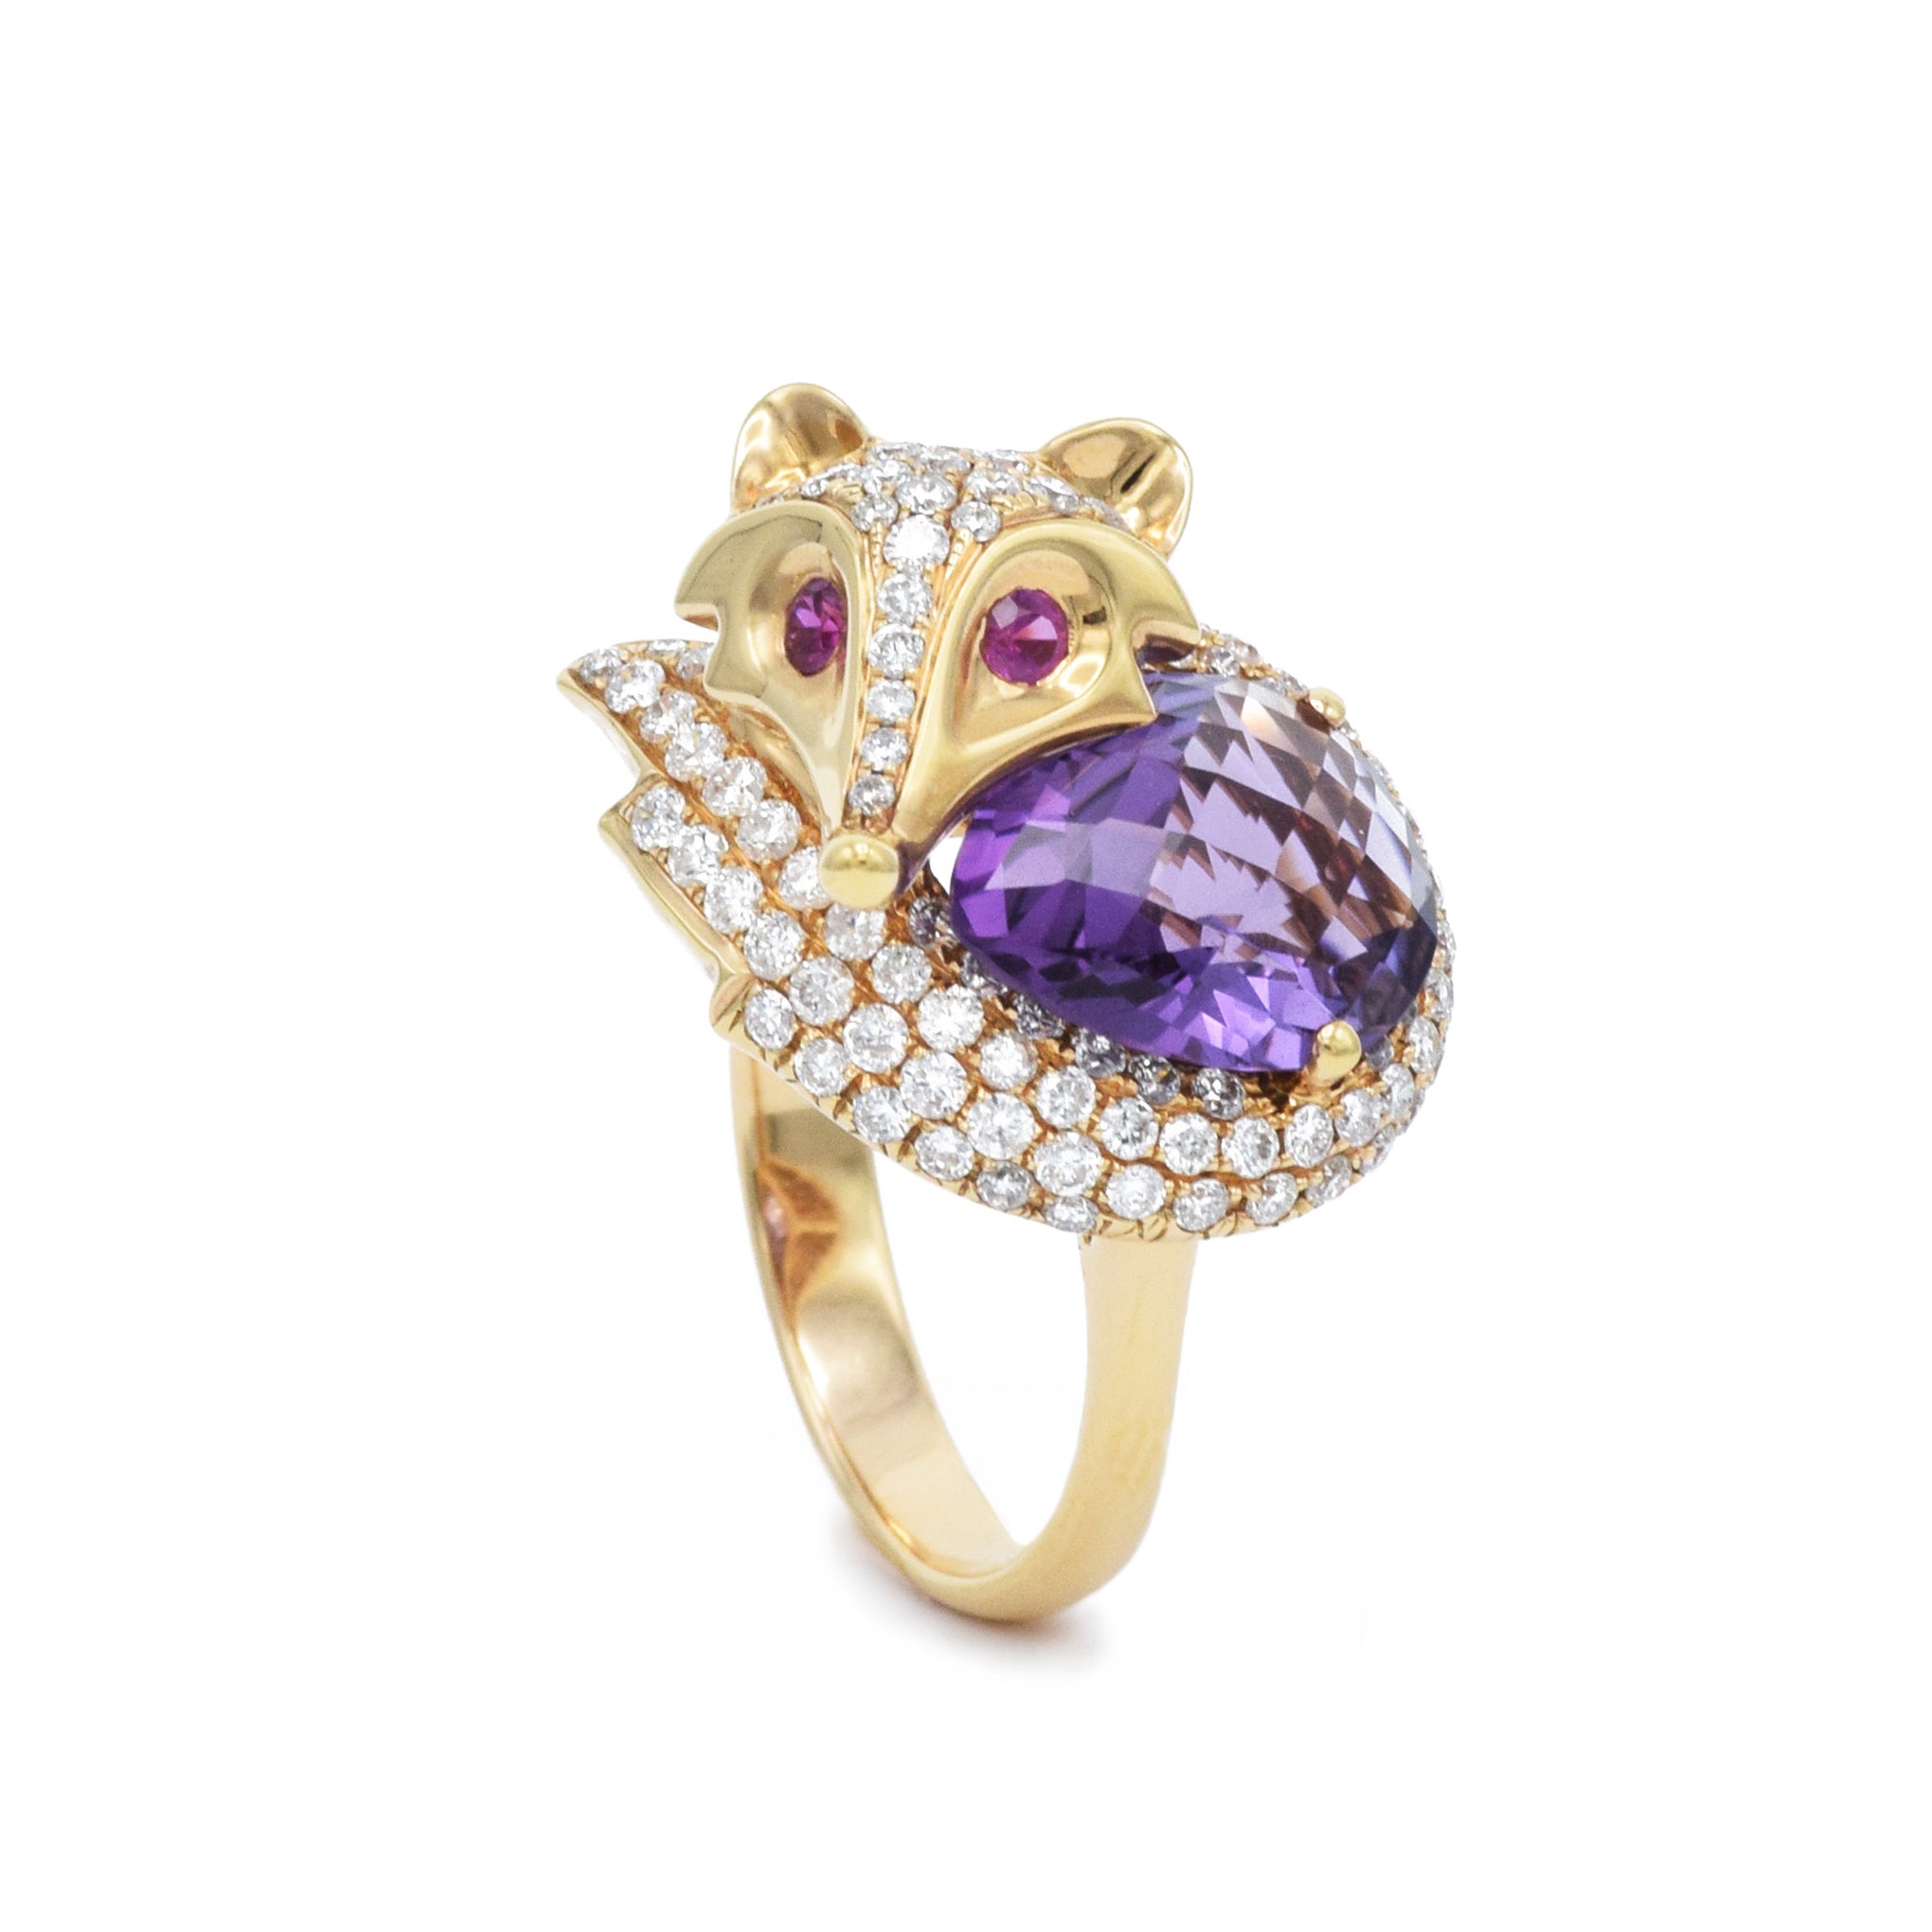 Fox Ring with Amethyst, Ruby, and Diamond